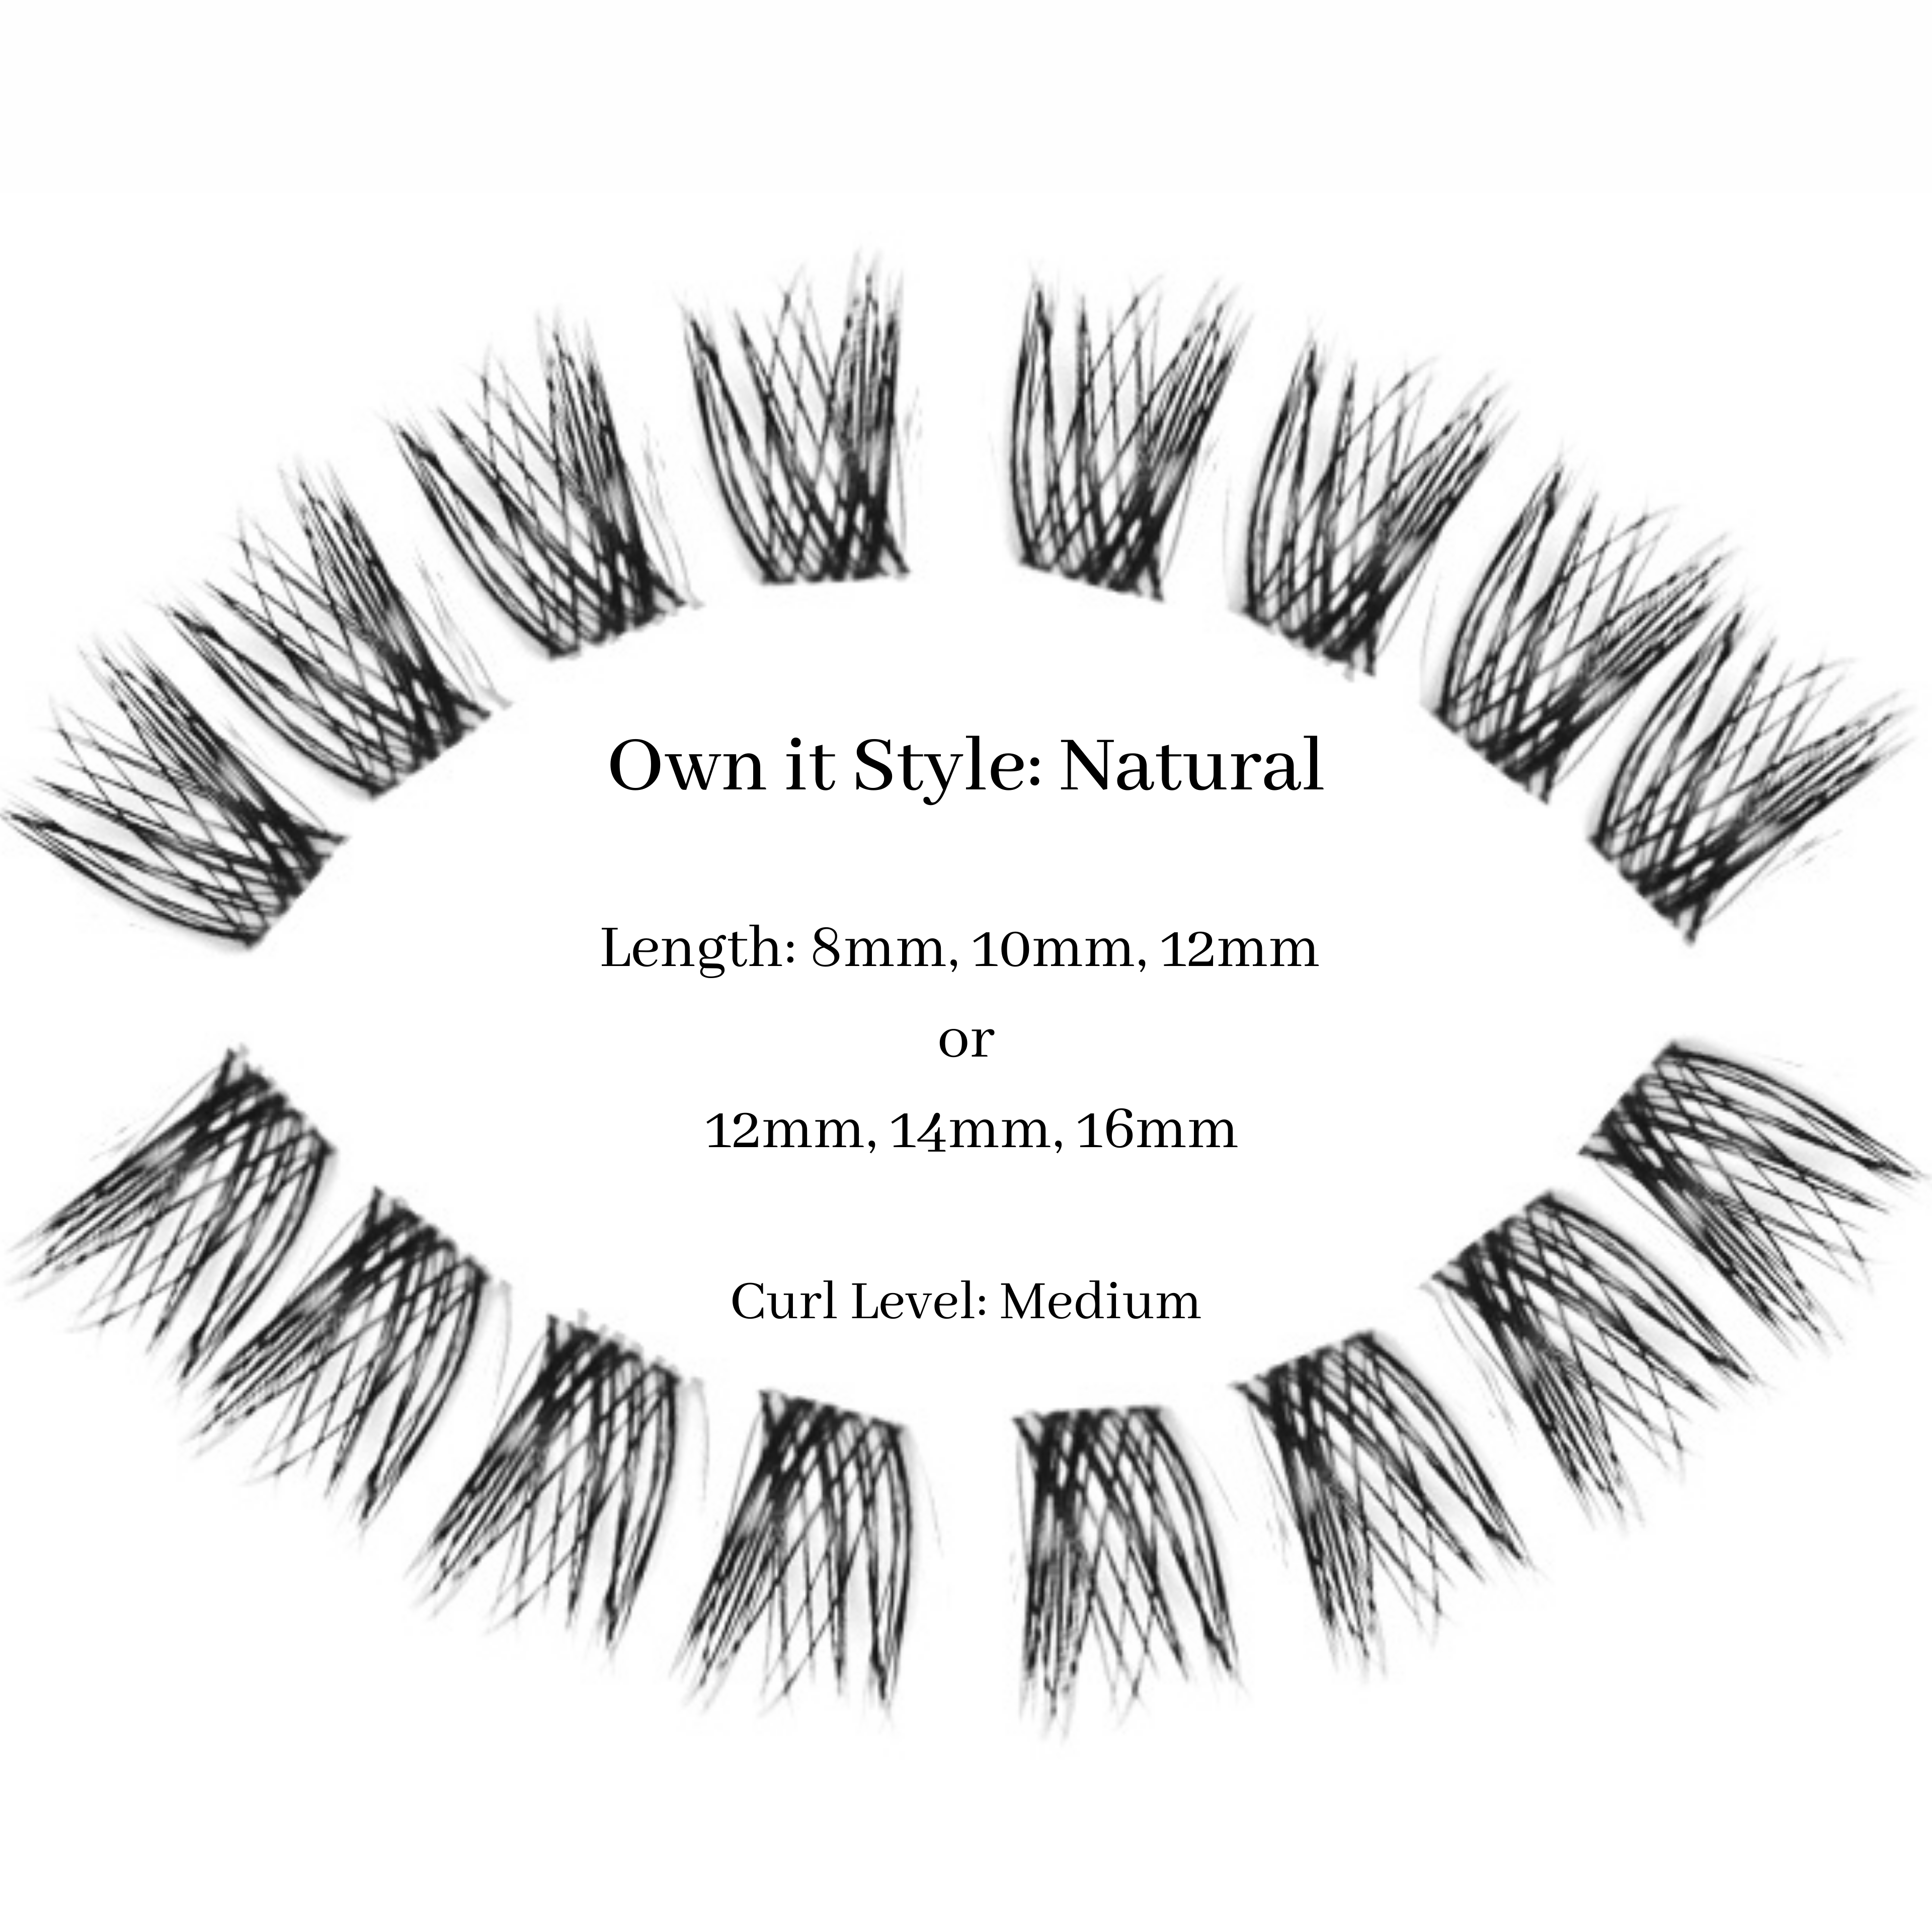 Own it Style: Natural - Curl type: Medium